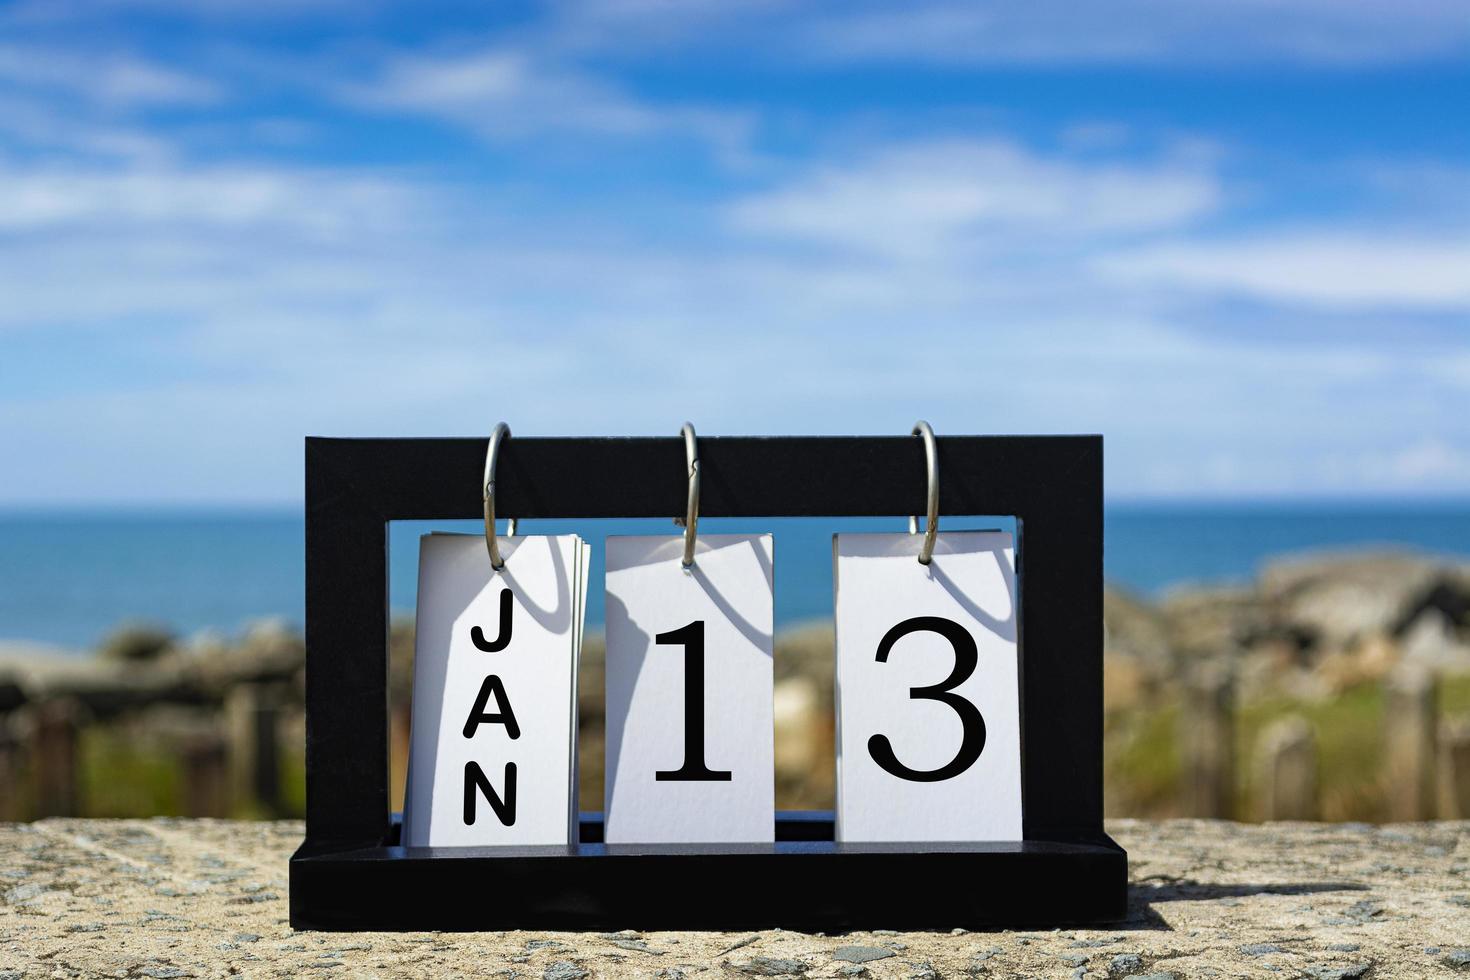 Jan 13 calendar date text on wooden frame with blurred background of ocean photo